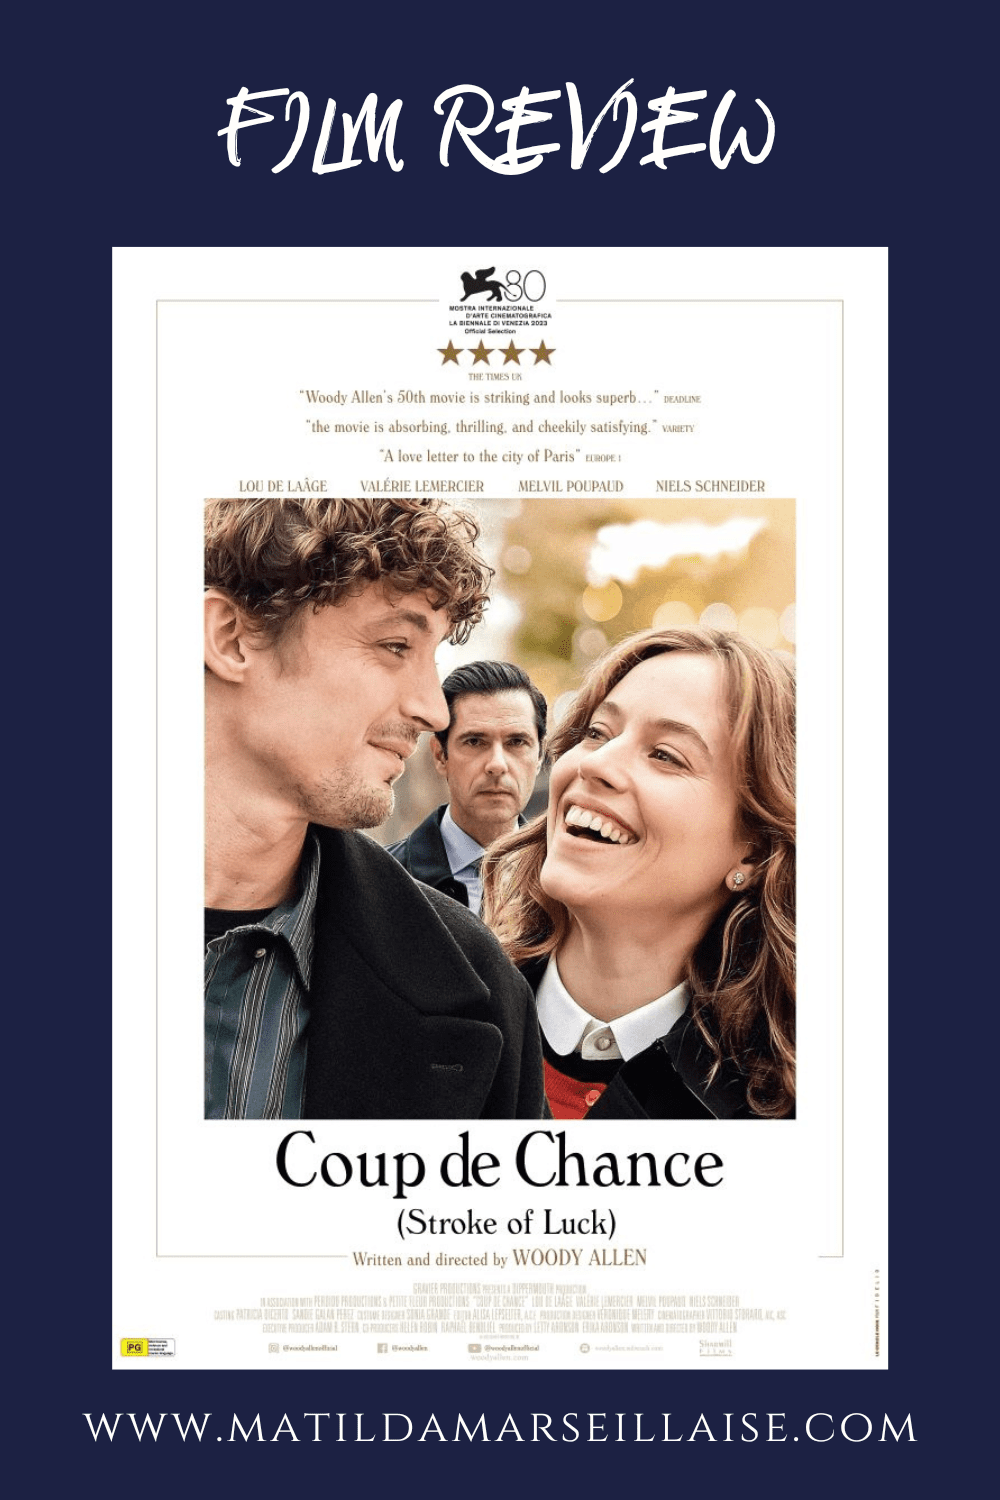 Woody Allen’s Coup de chance: don’t bet on this film